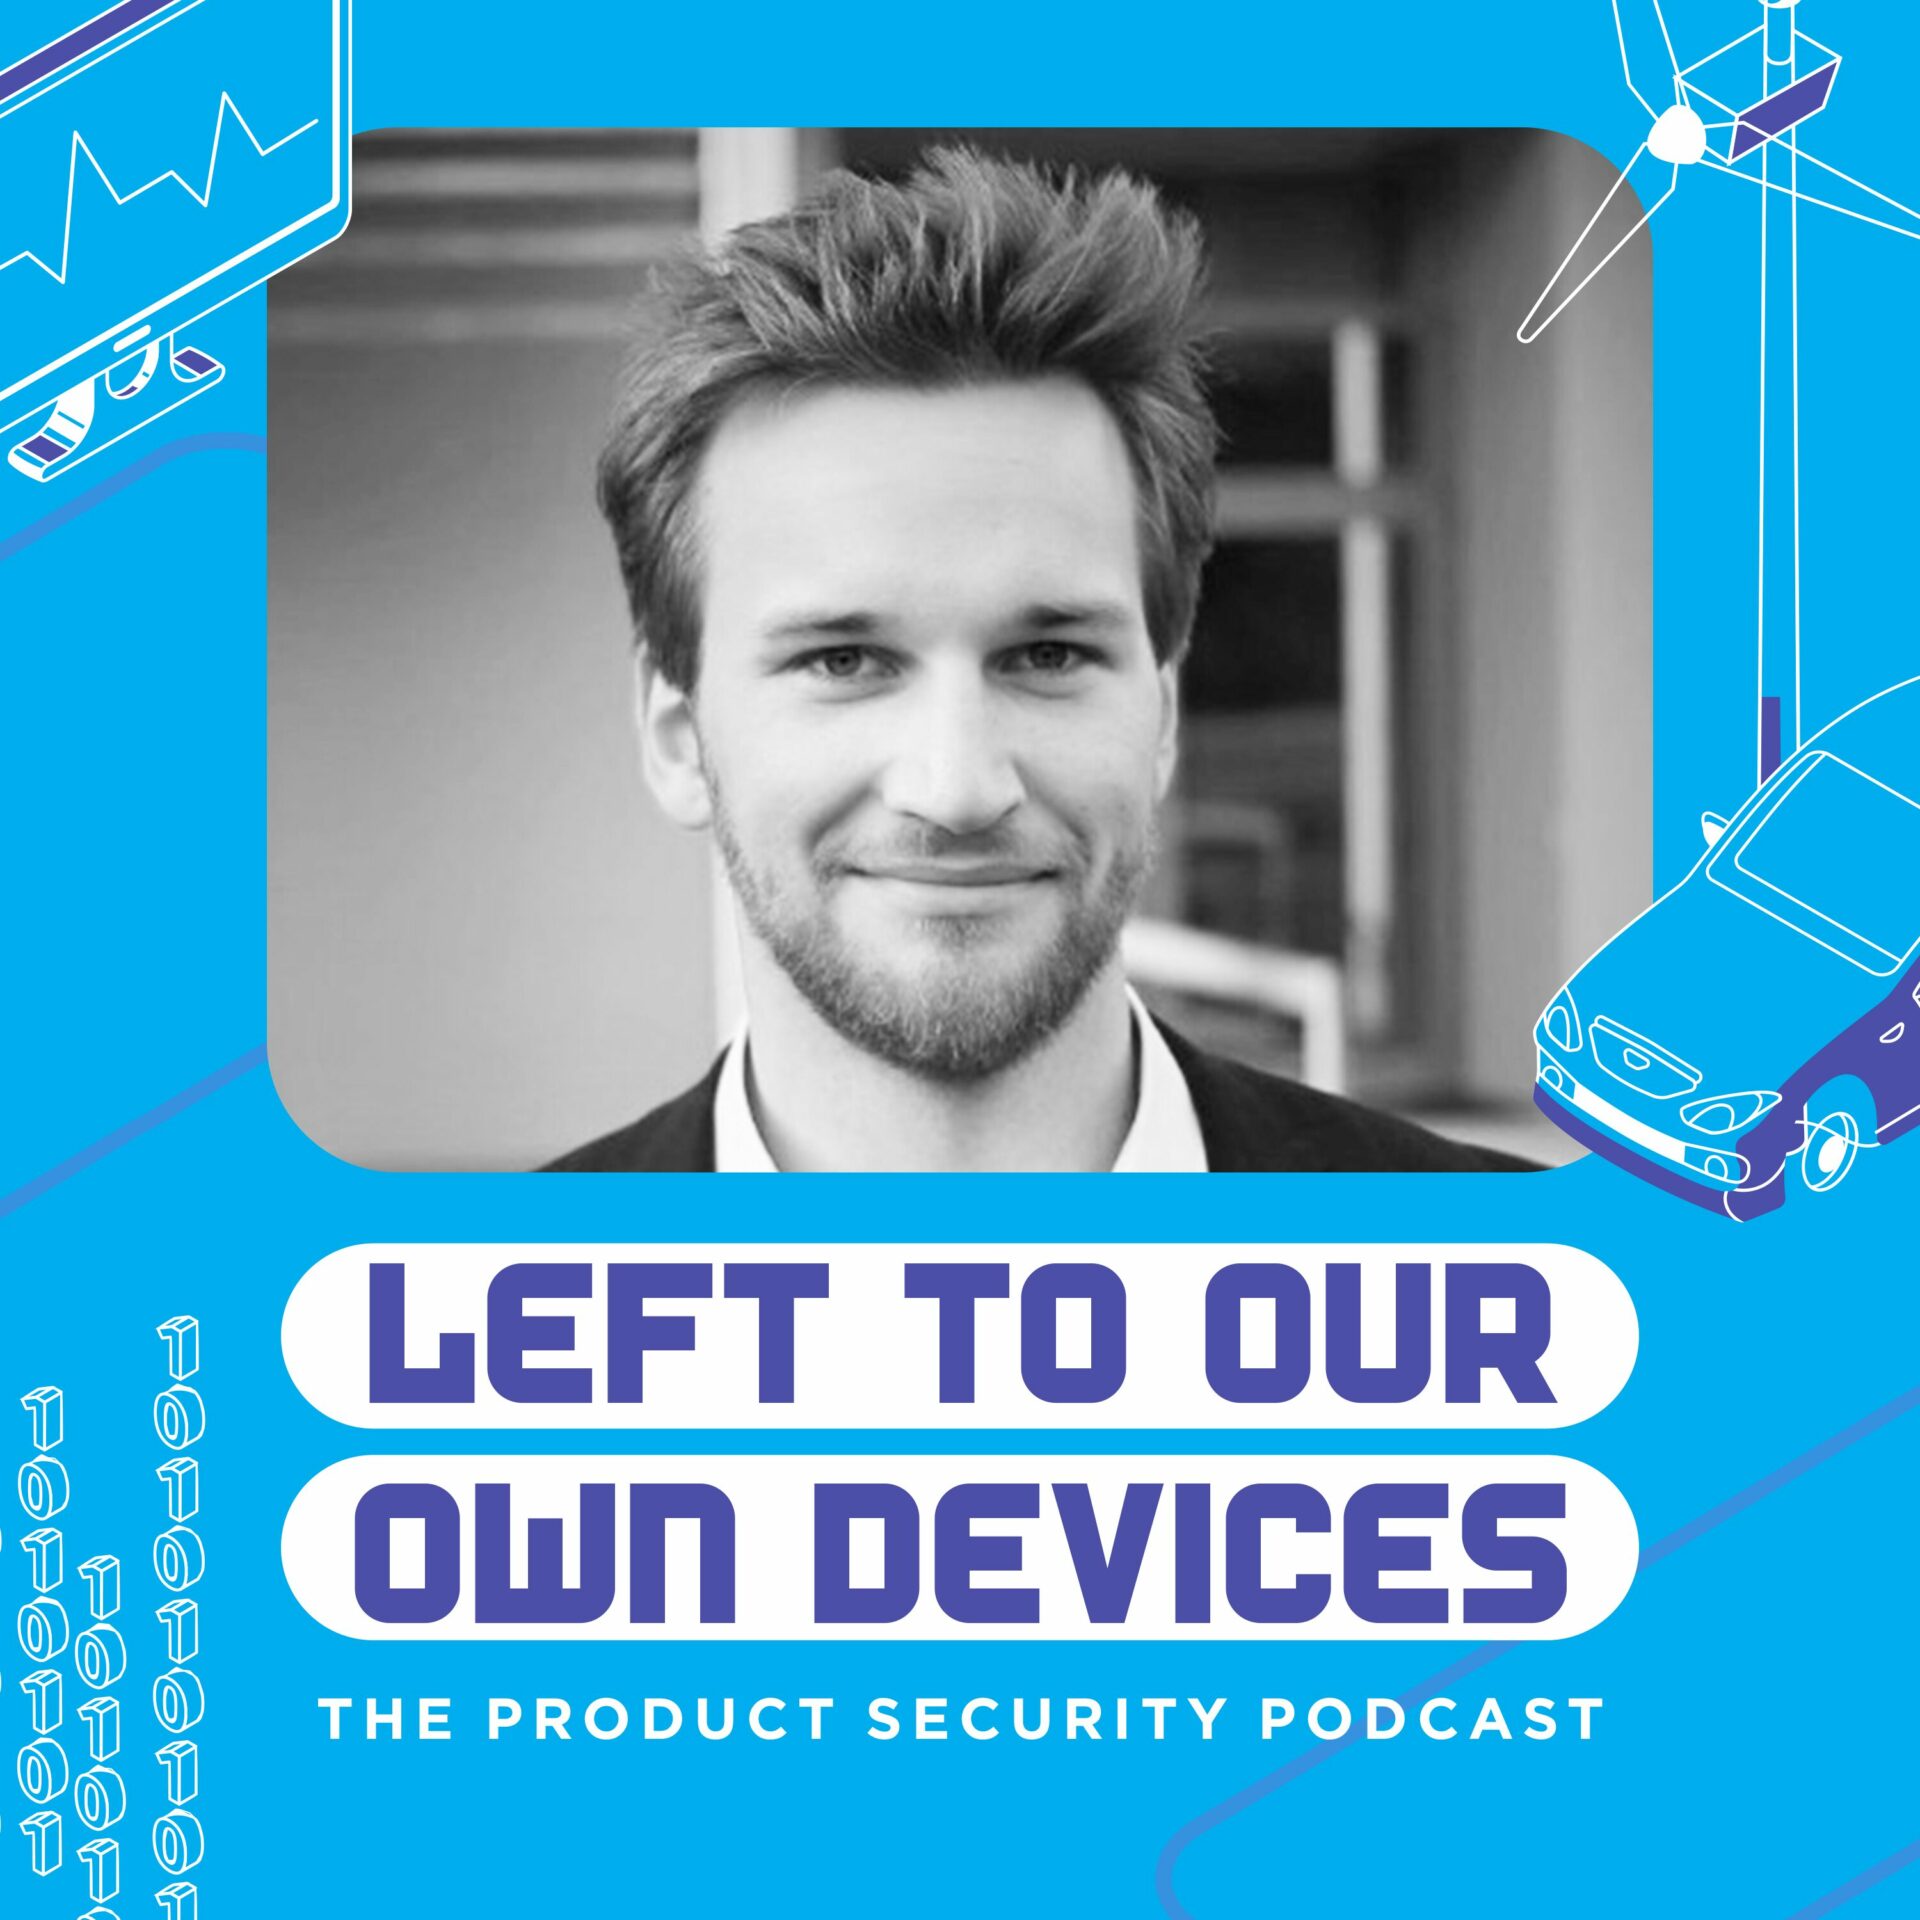 #44: Henning Kruse: When OT, Network Security and Automotive Meet